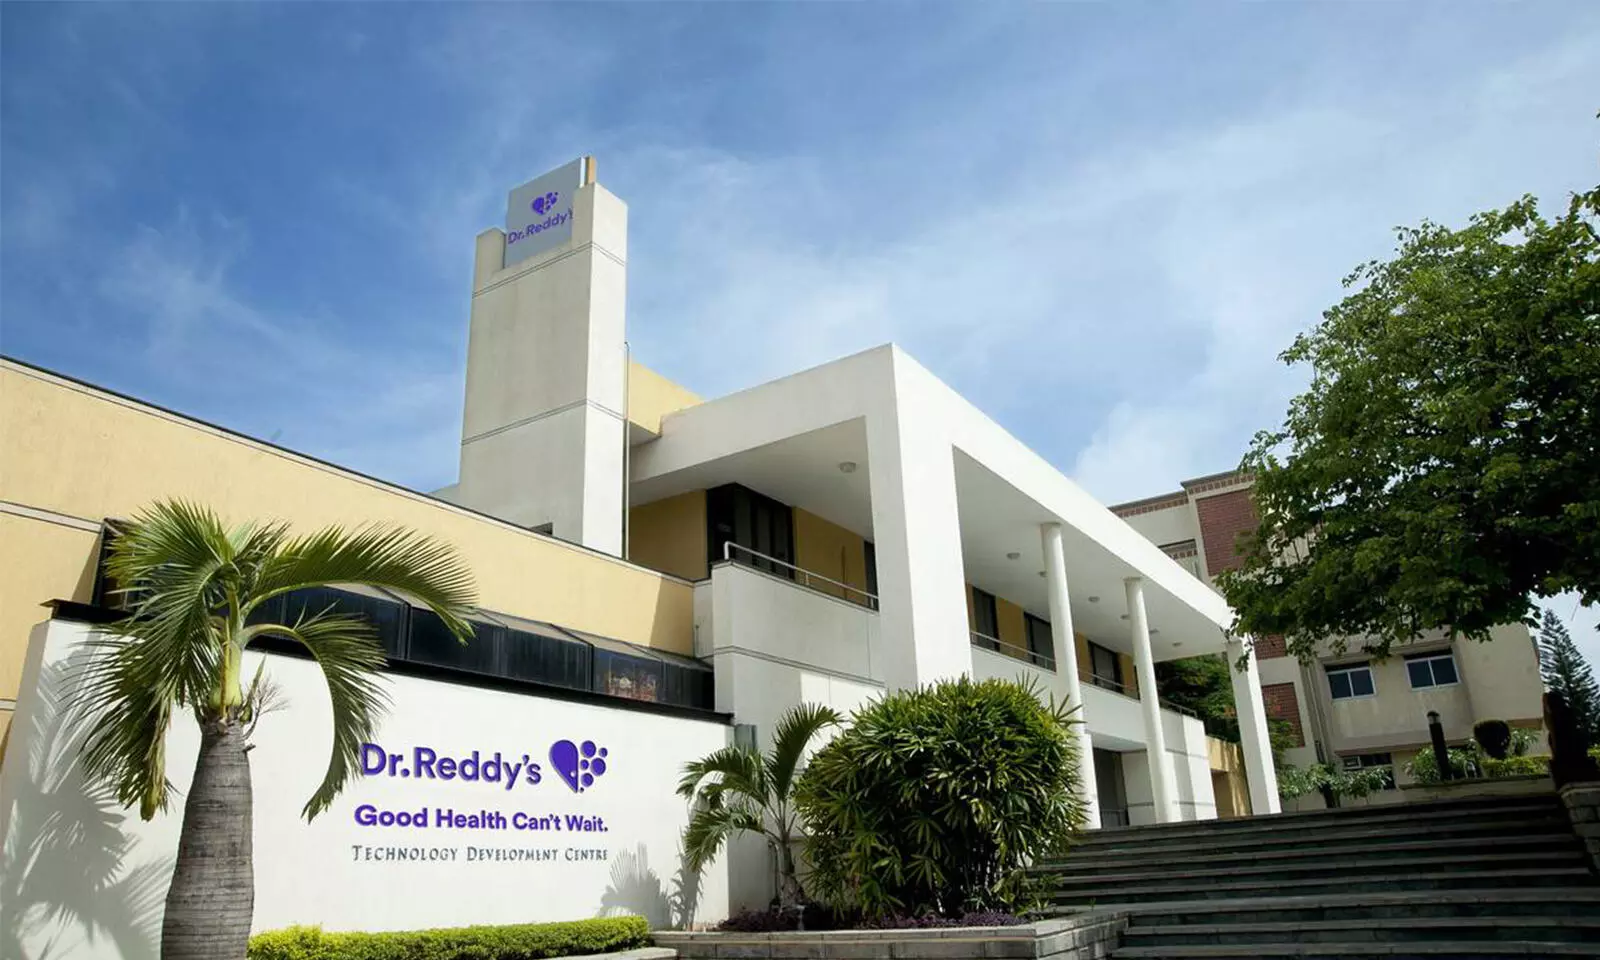 Dr Reddys, Citius Pharma ink pact to sell rights to anti-cancer agent